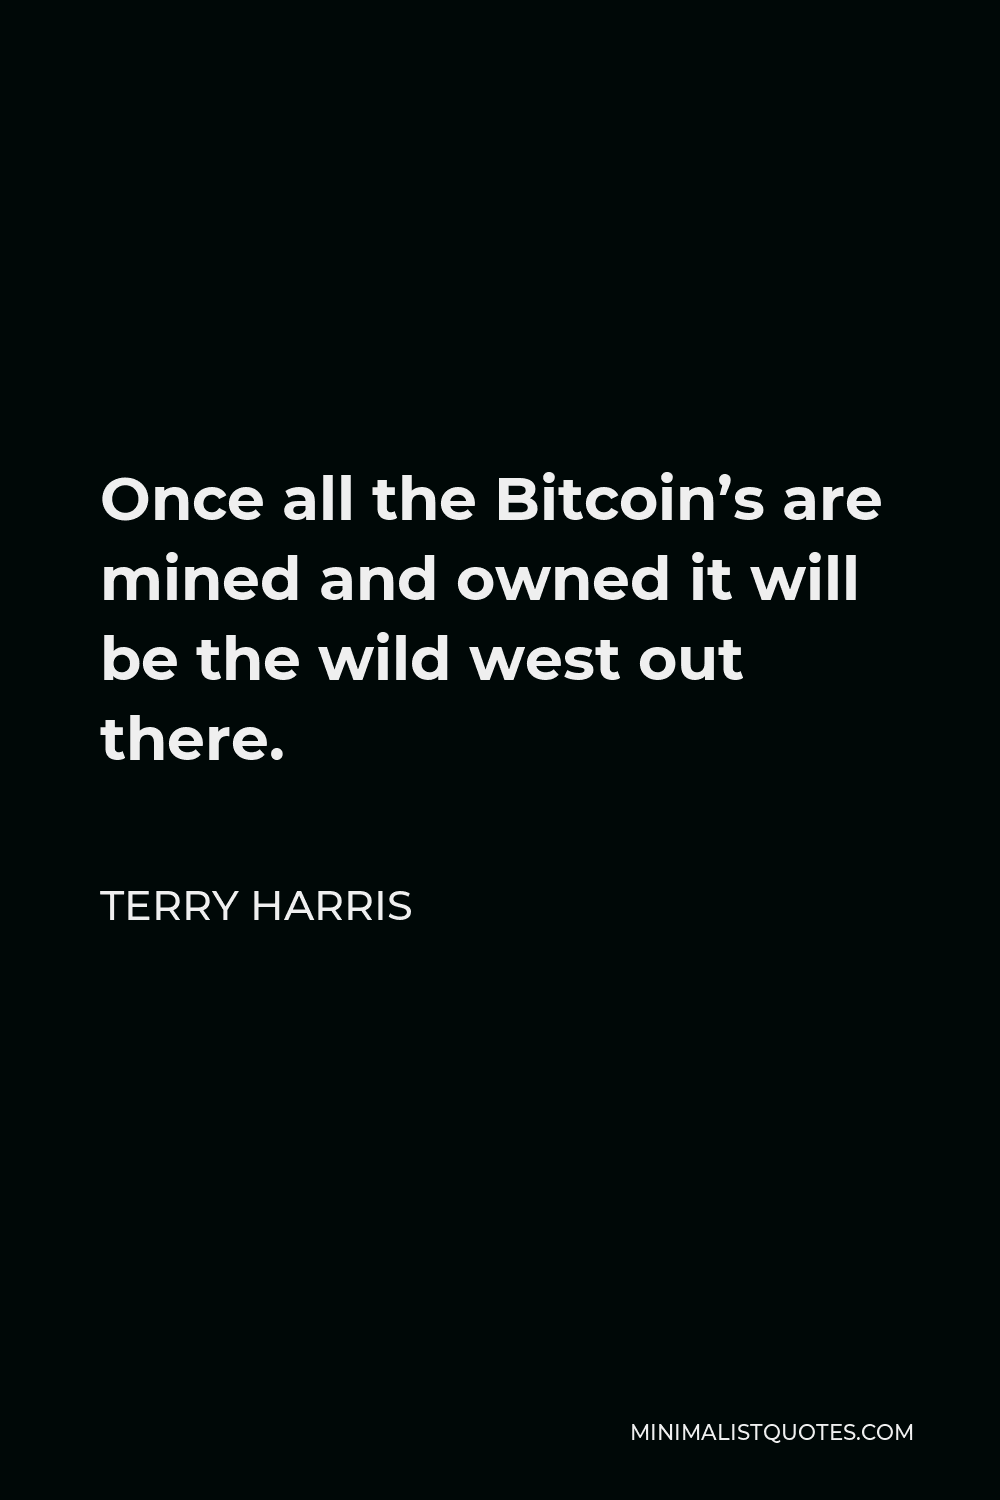 Terry Harris Quote - Once all the Bitcoin’s are mined and owned it will be the wild west out there.